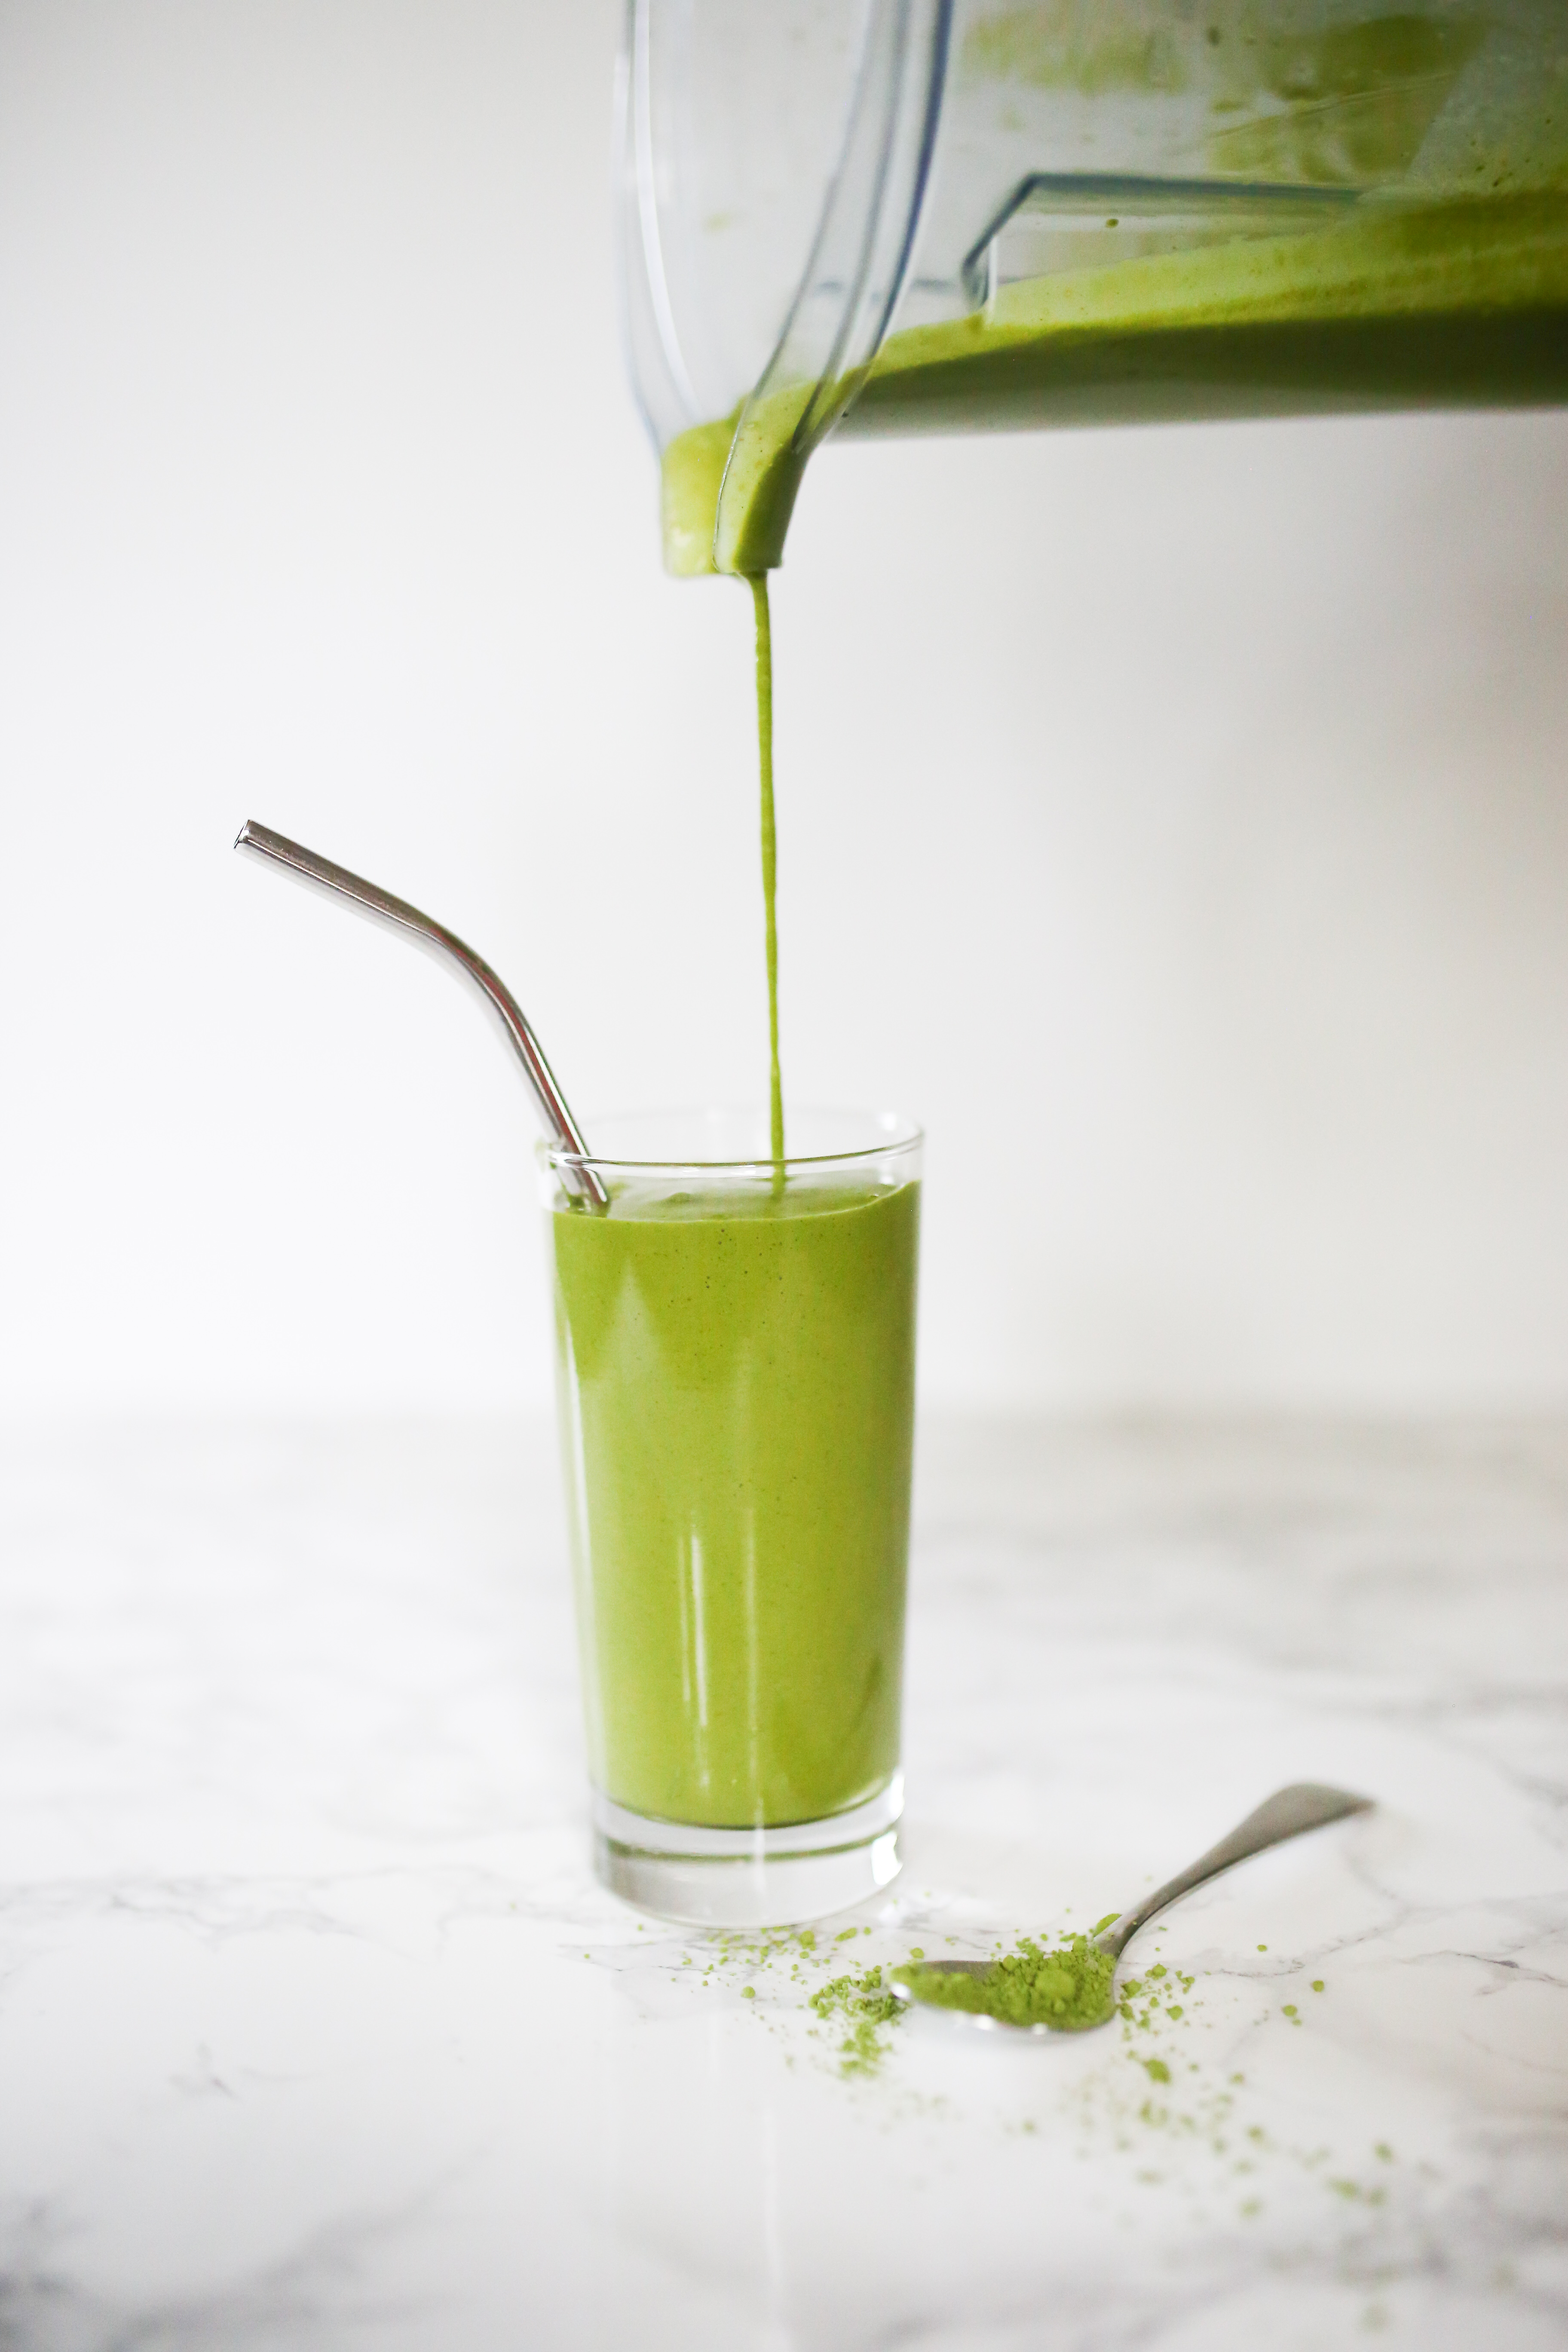 Green Matcha smoothie in tall glass with metal straw, smoothie being poured from vitamix blender